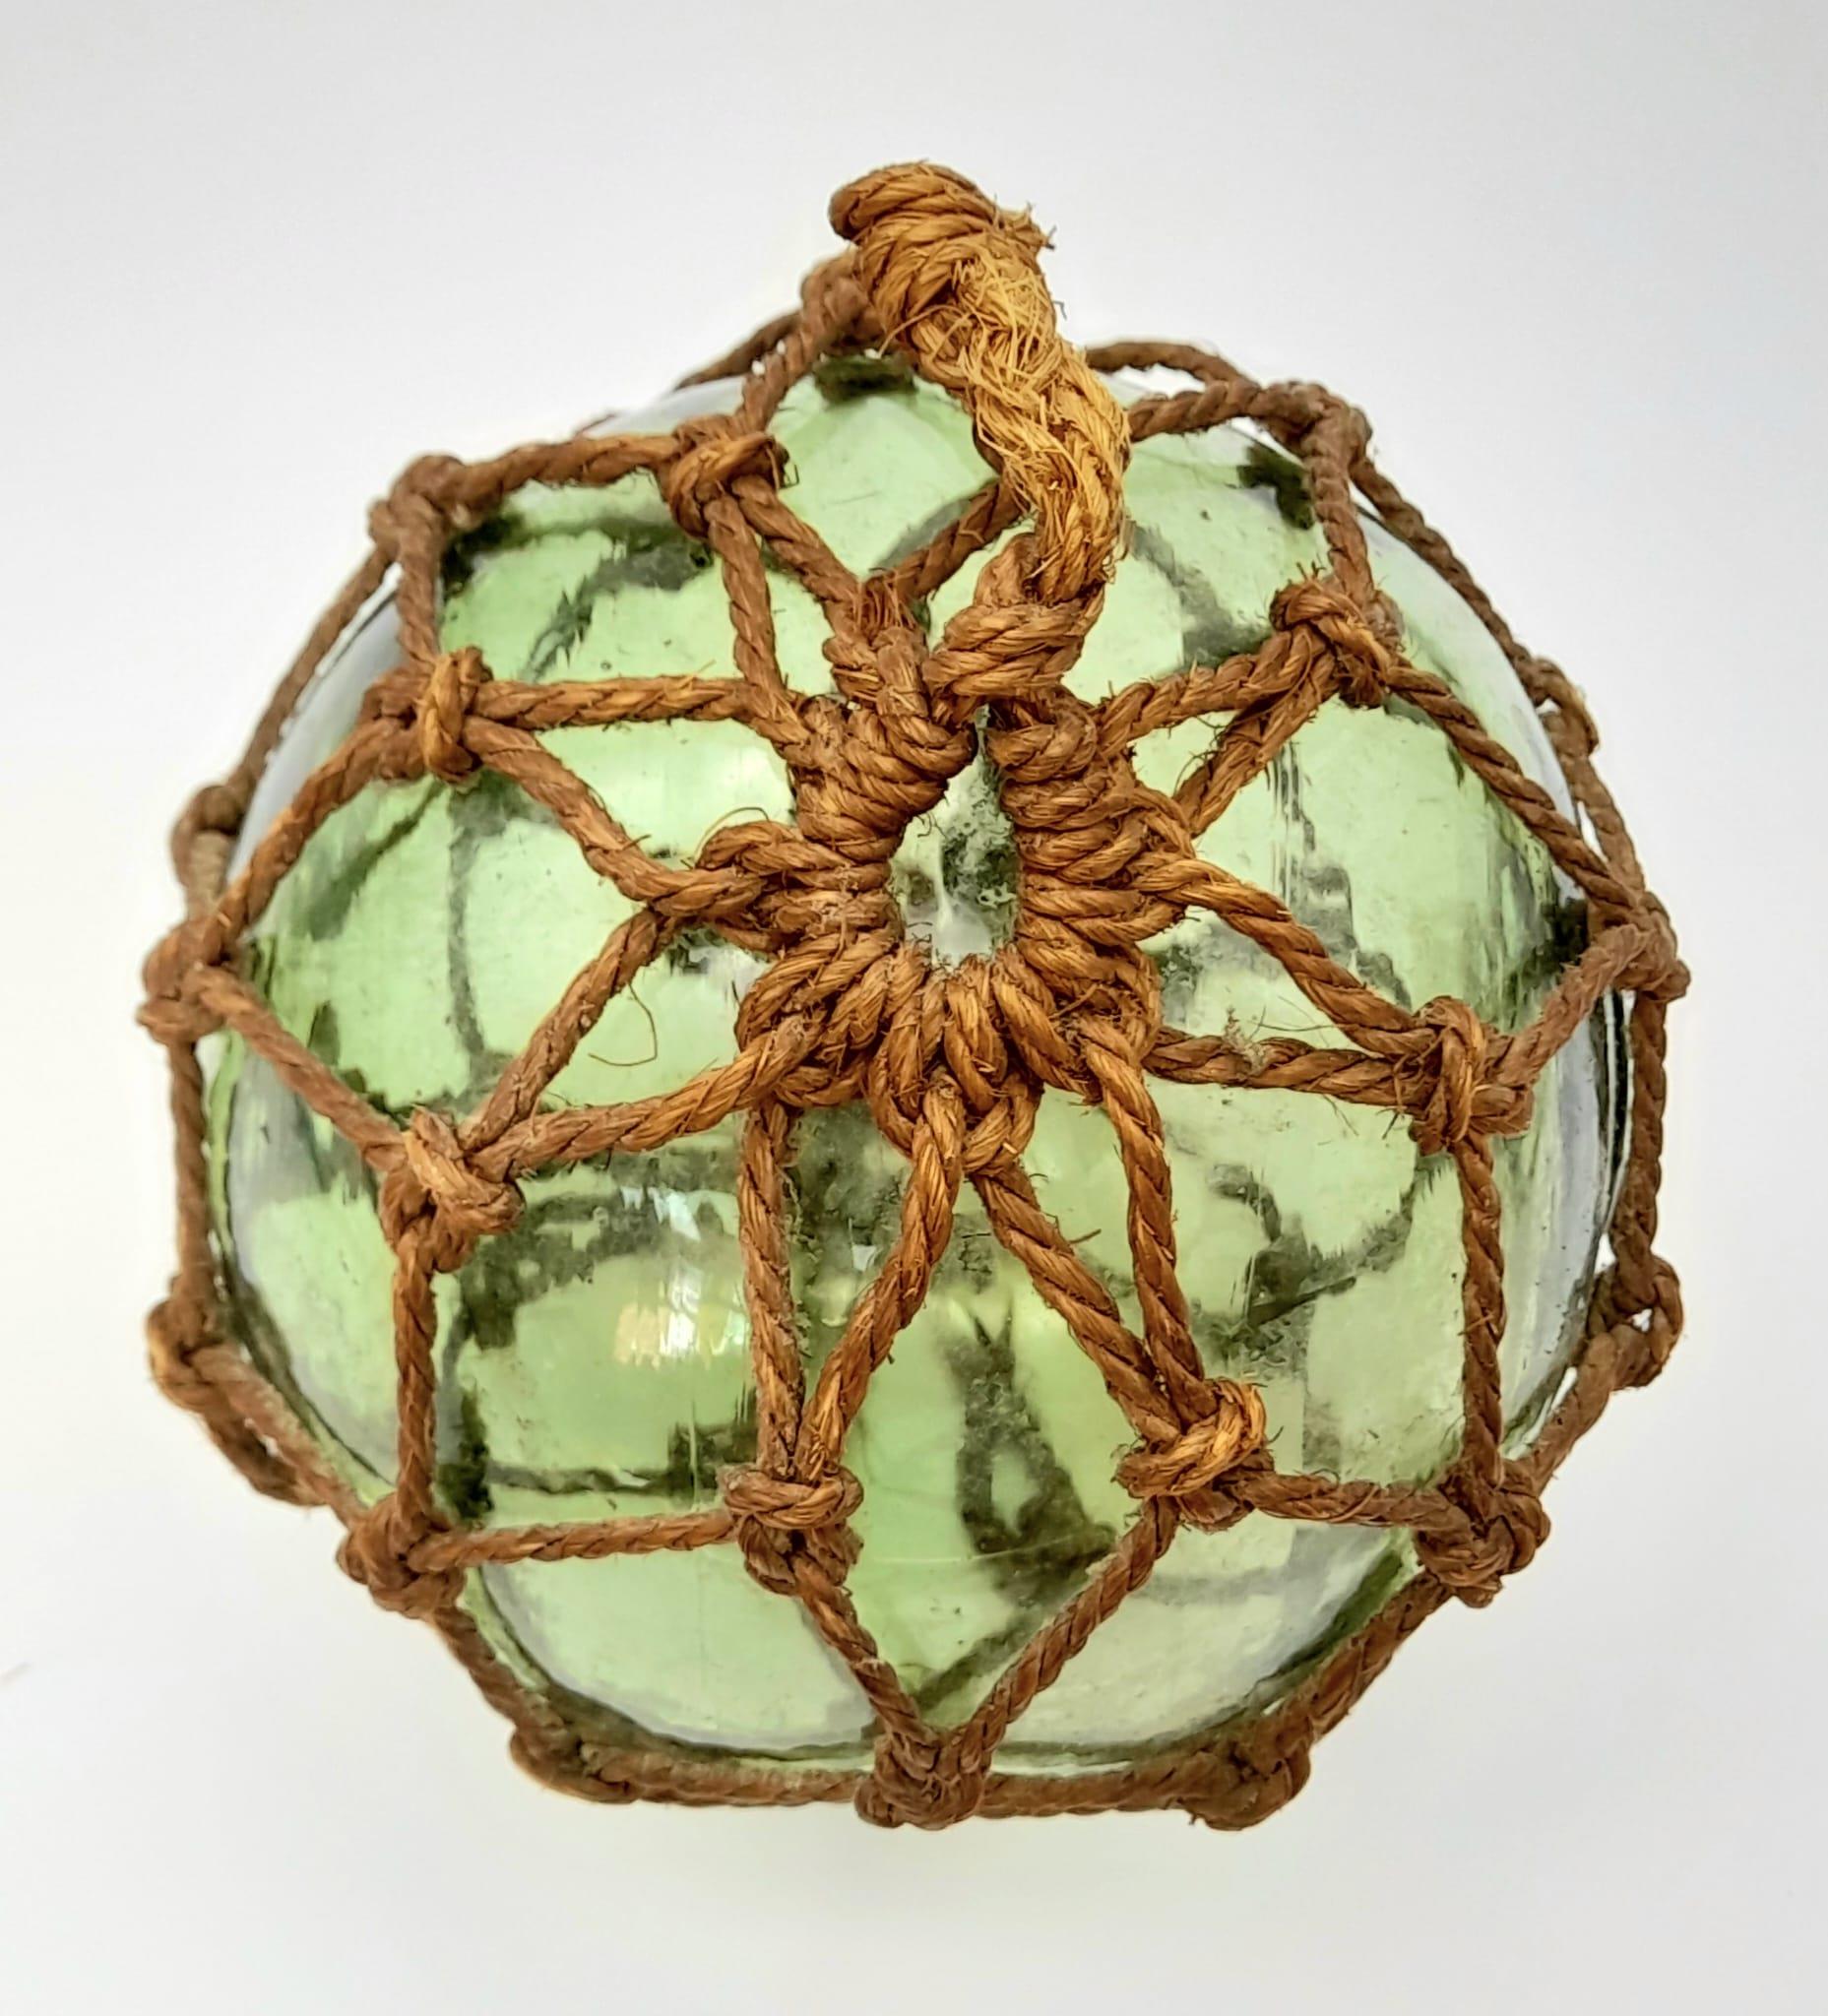 An Antique Japanese Glass Fishing Float with a Lovely Pontil Mark and Netting. - Image 3 of 4